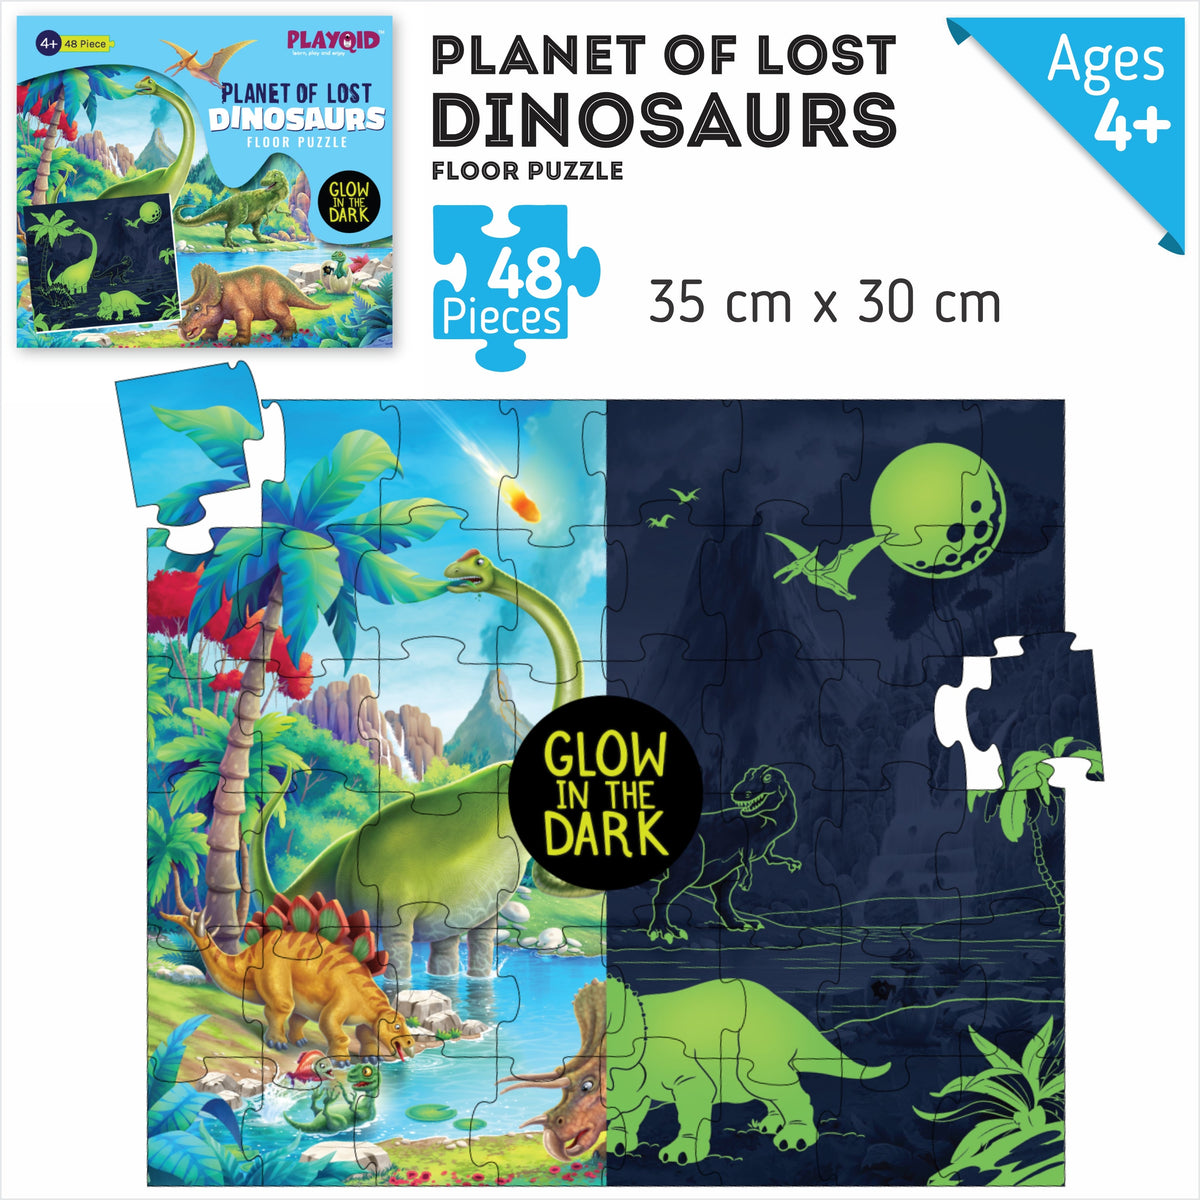 PLANET OF LOST DINOSAURS - GLOW IN THE DARK